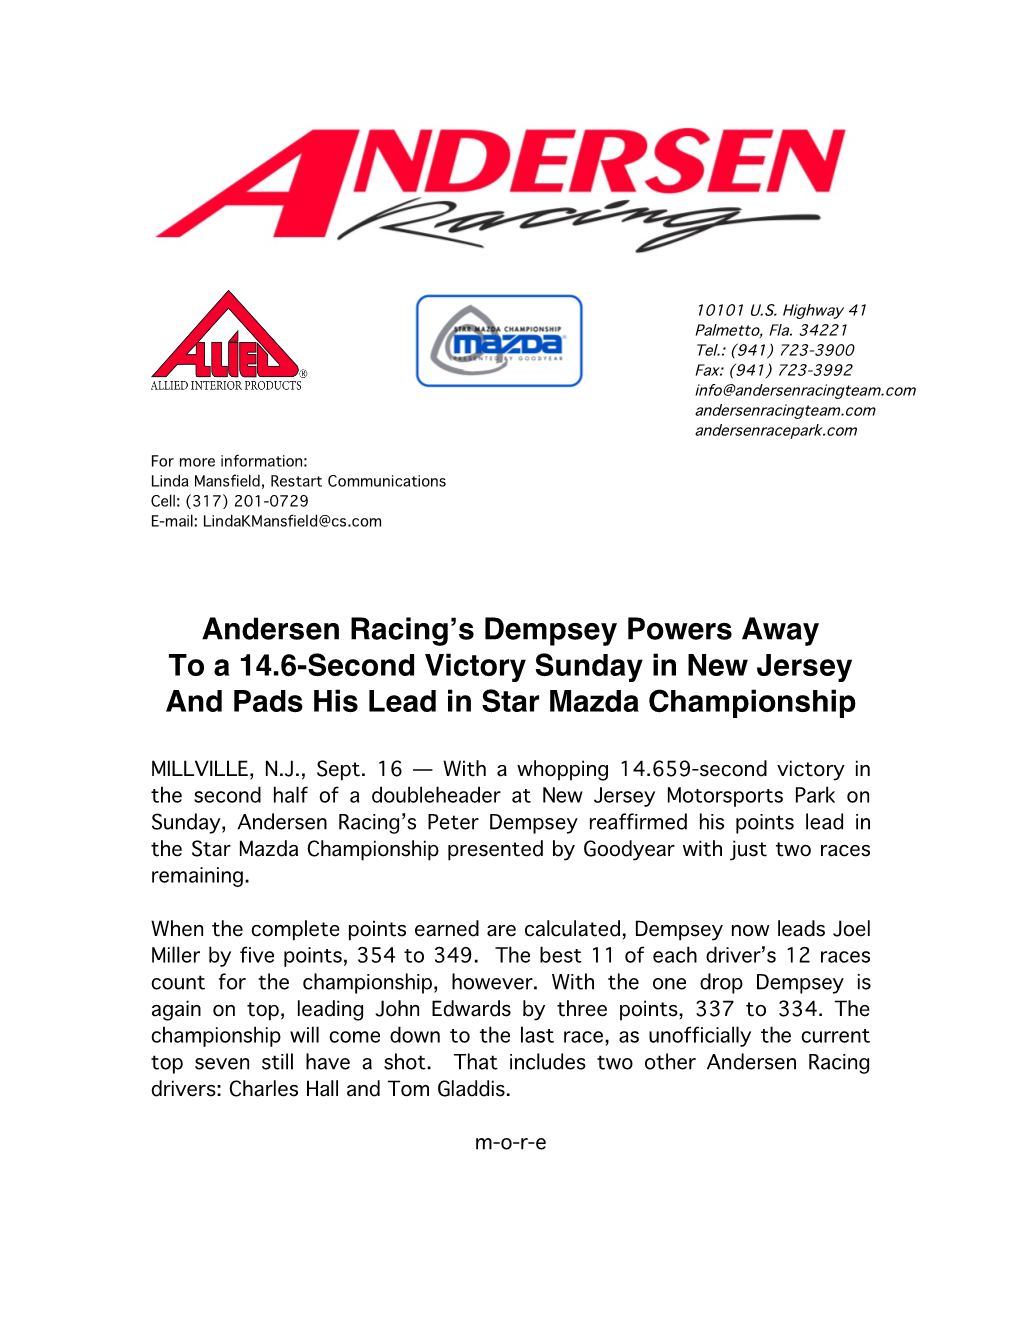 Andersen Racing's Dempsey Powers Away to a 14.6-Second